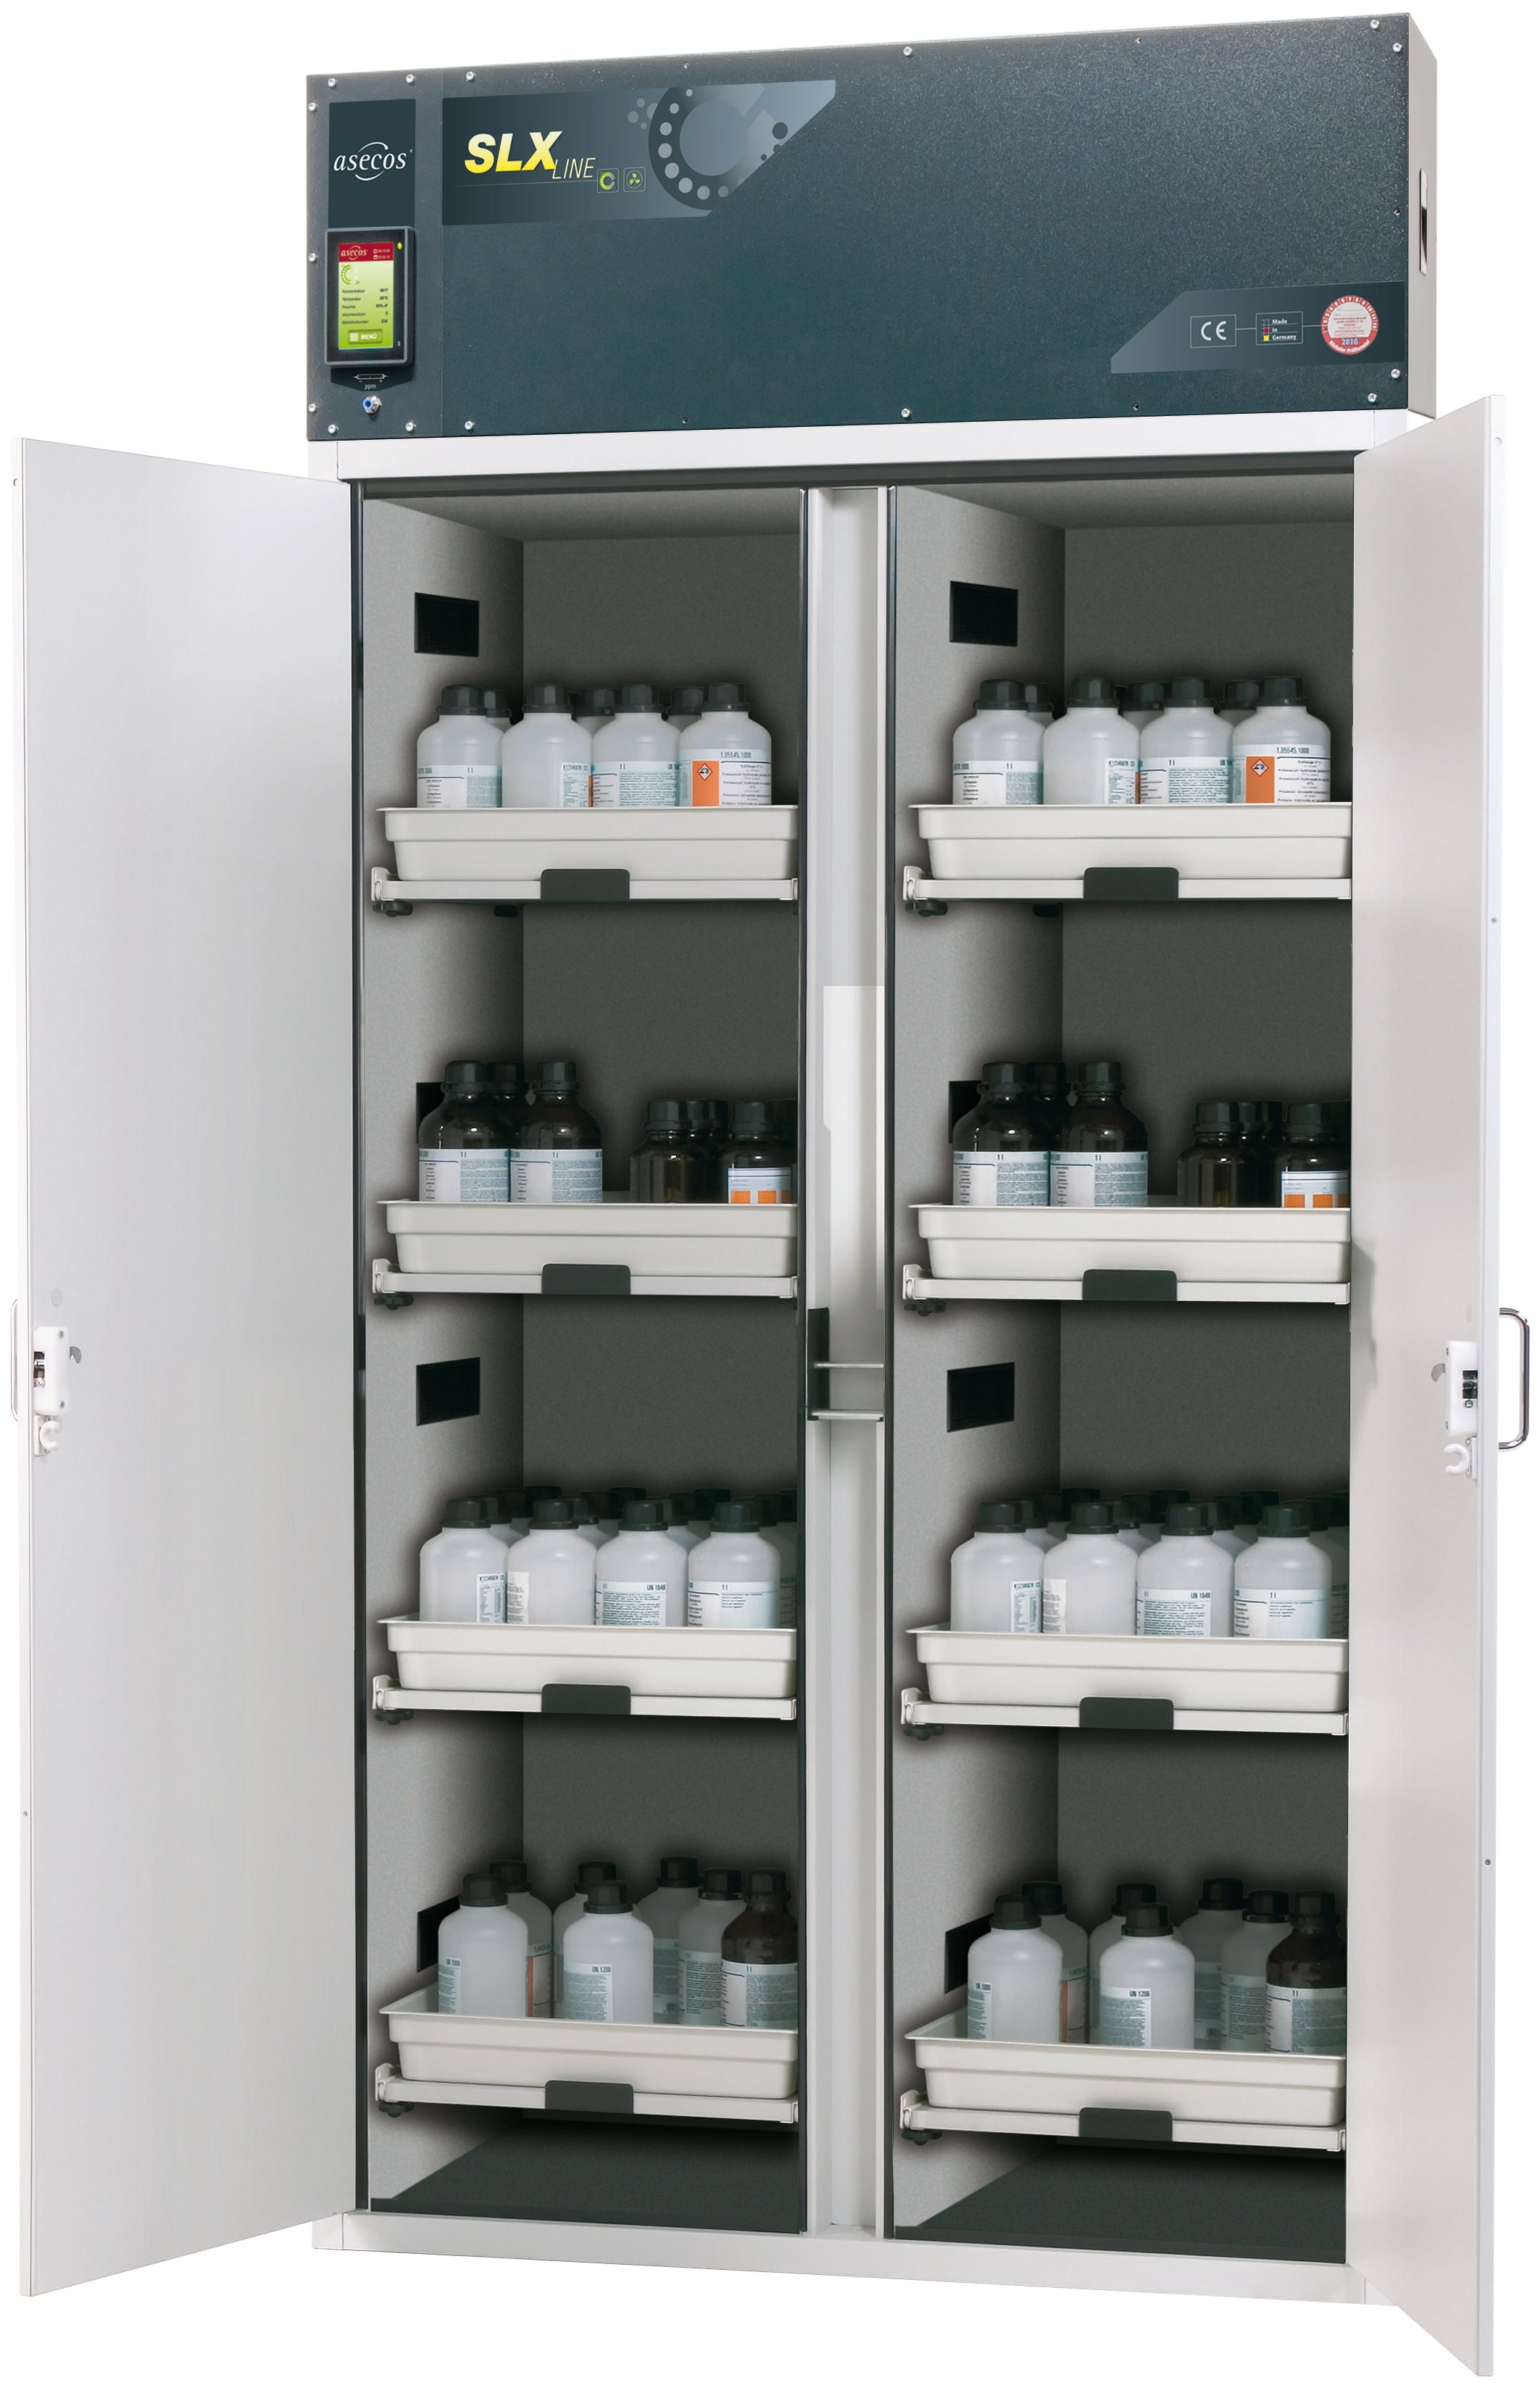 Circulating air filter cabinet SLX-CLASSIC model SLX.230.120.MV in light gray RAL 7035 with 8x AbZ shelf pull-outs (FP plate/polypropylene)